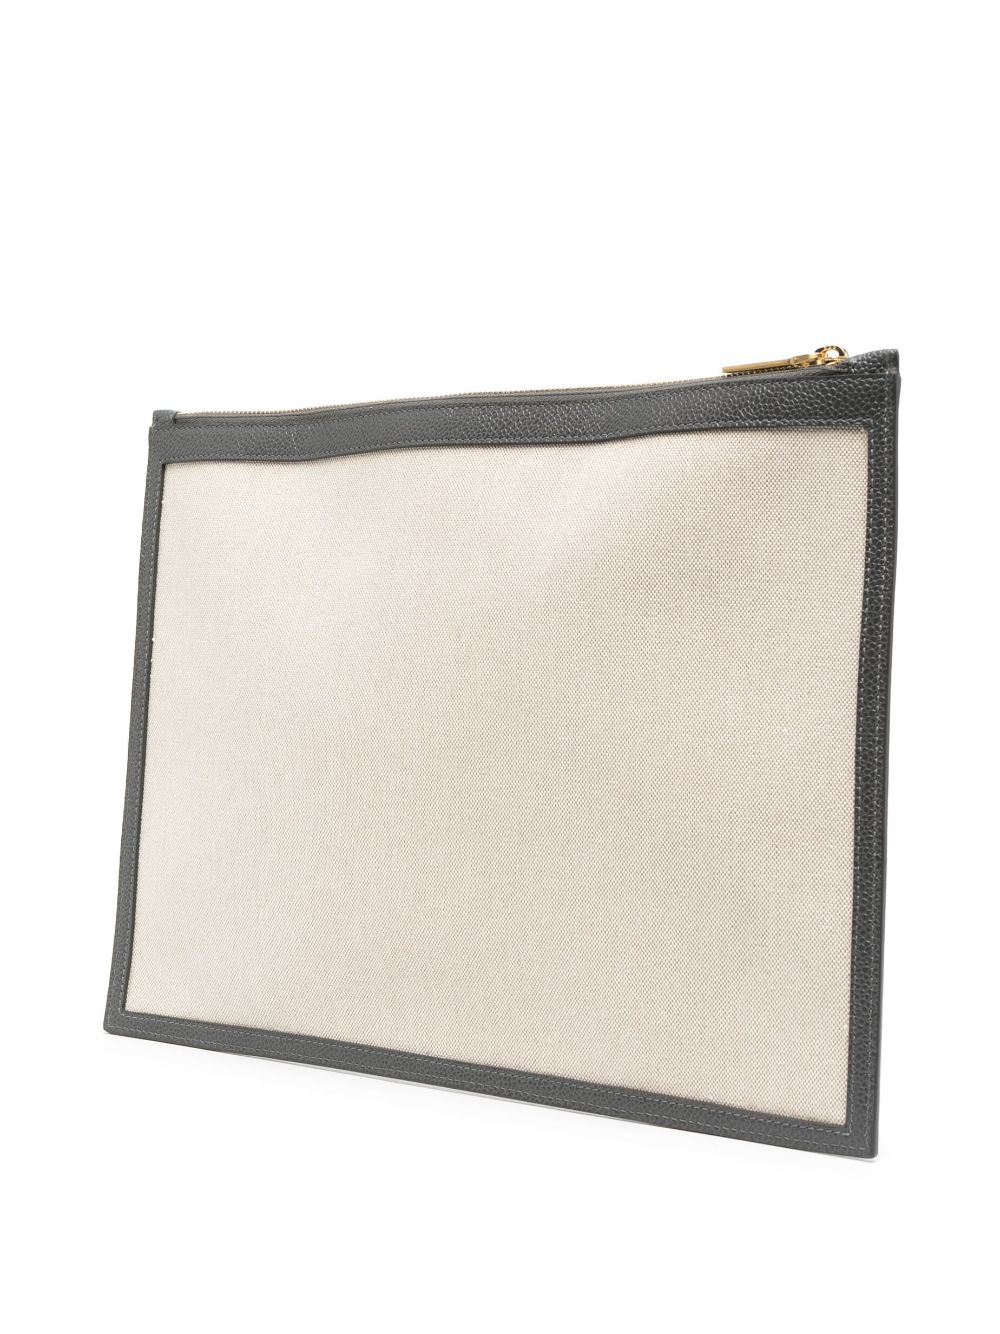 Medium Document Holder W/ Leather Pocket In Salt And Pepper Cotton Canvas Natural